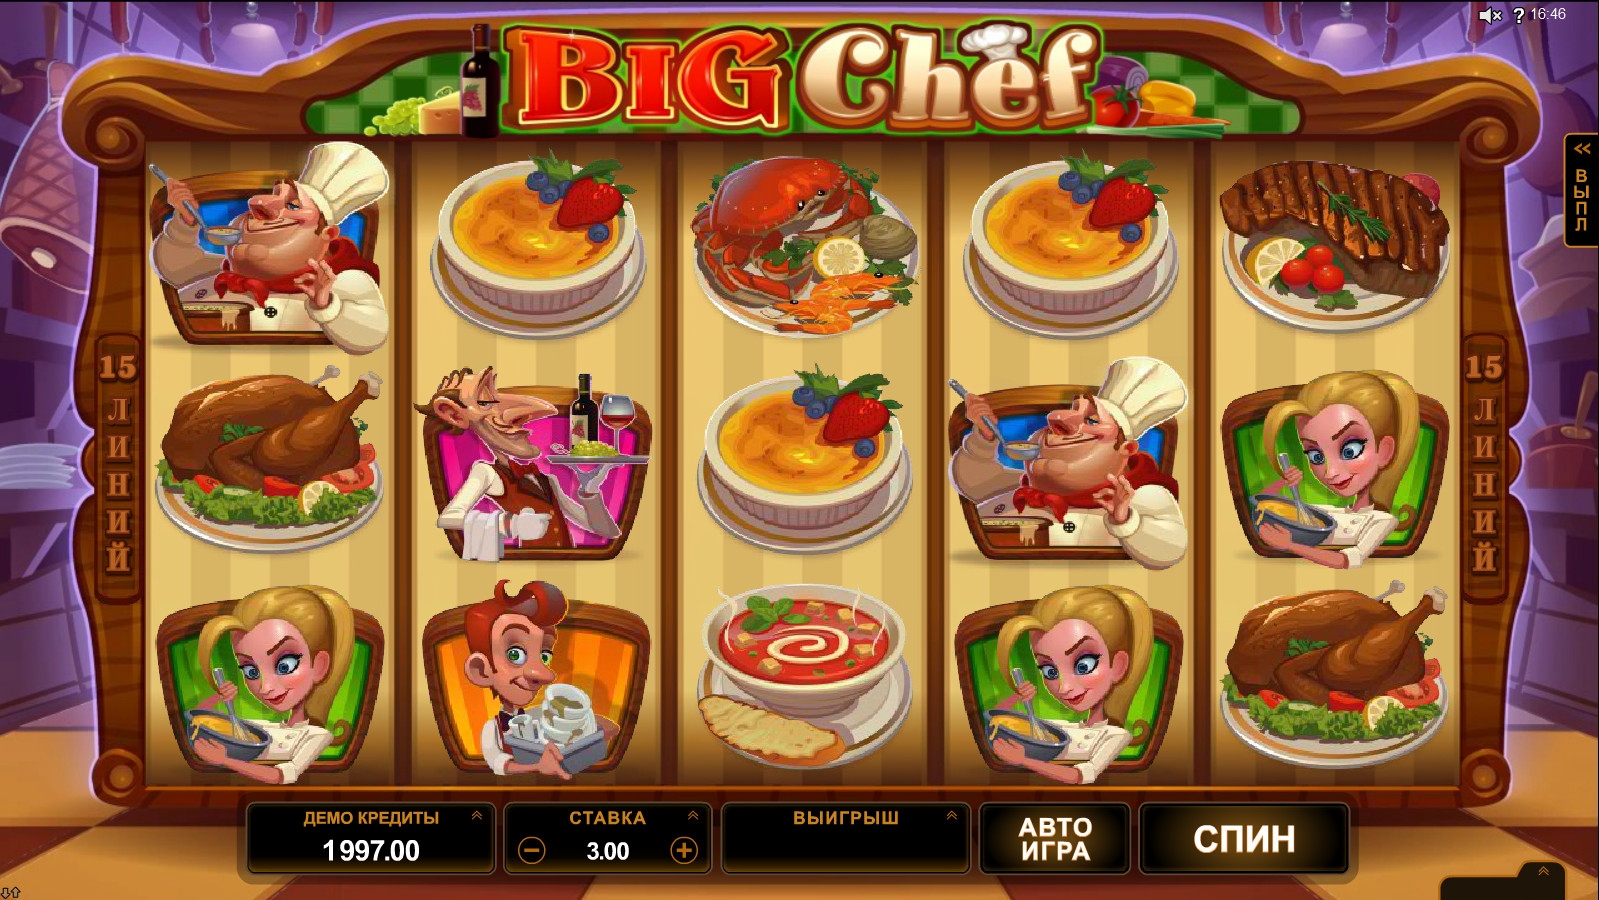 Big Chef (Big Chef) from category Slots